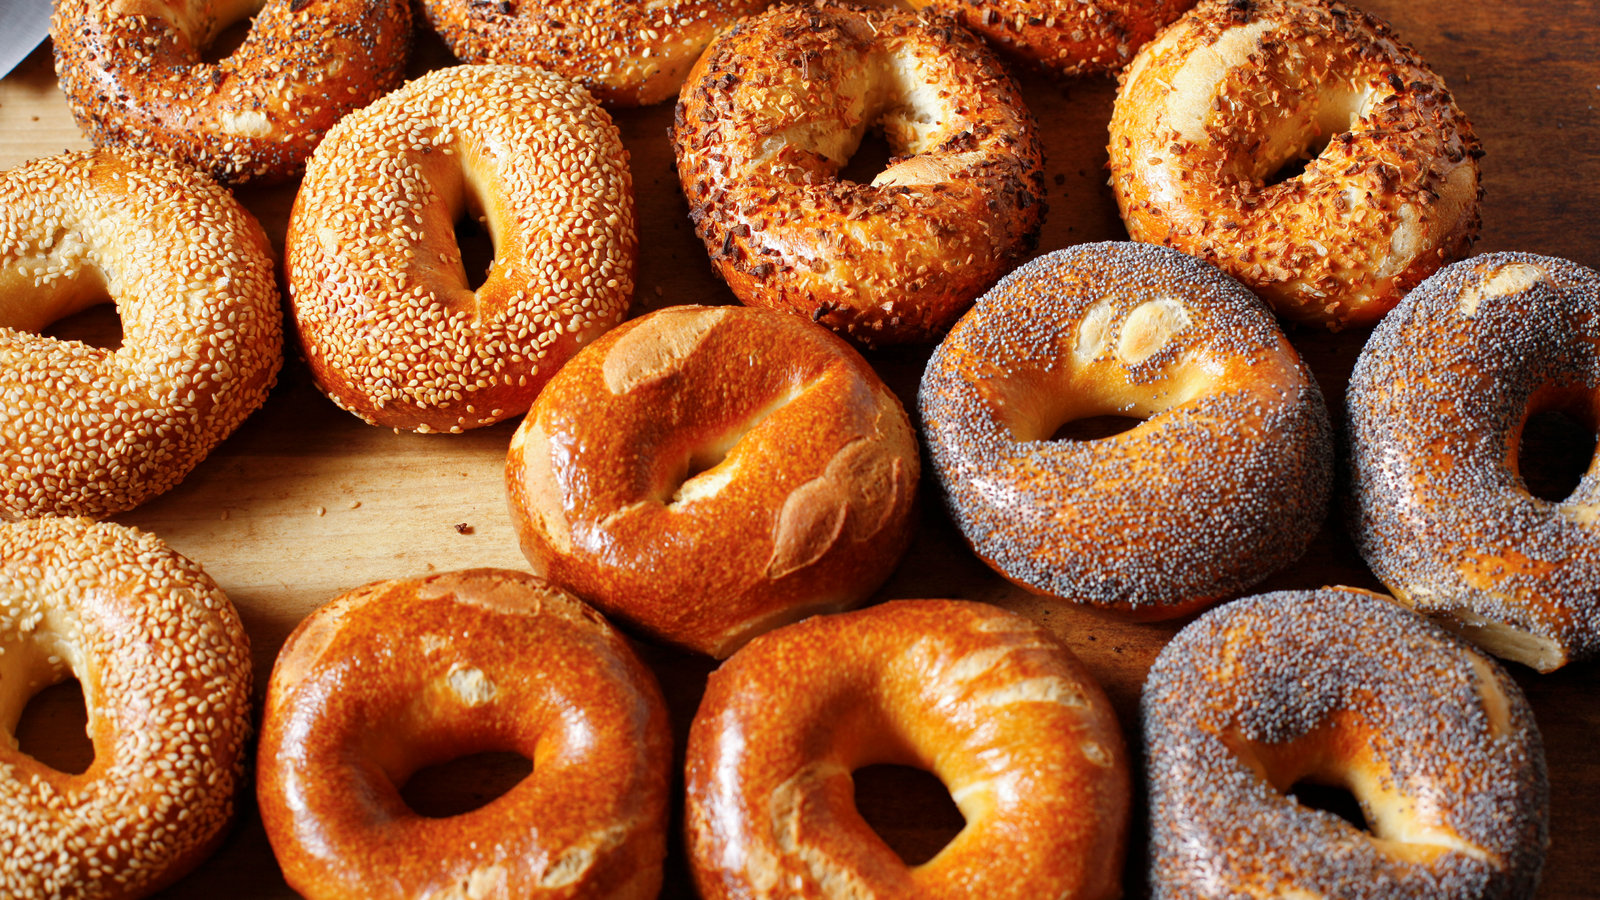 🍰 We Know Which Cake Represents Your Personality Based on the Bakery Items You Choose bagels